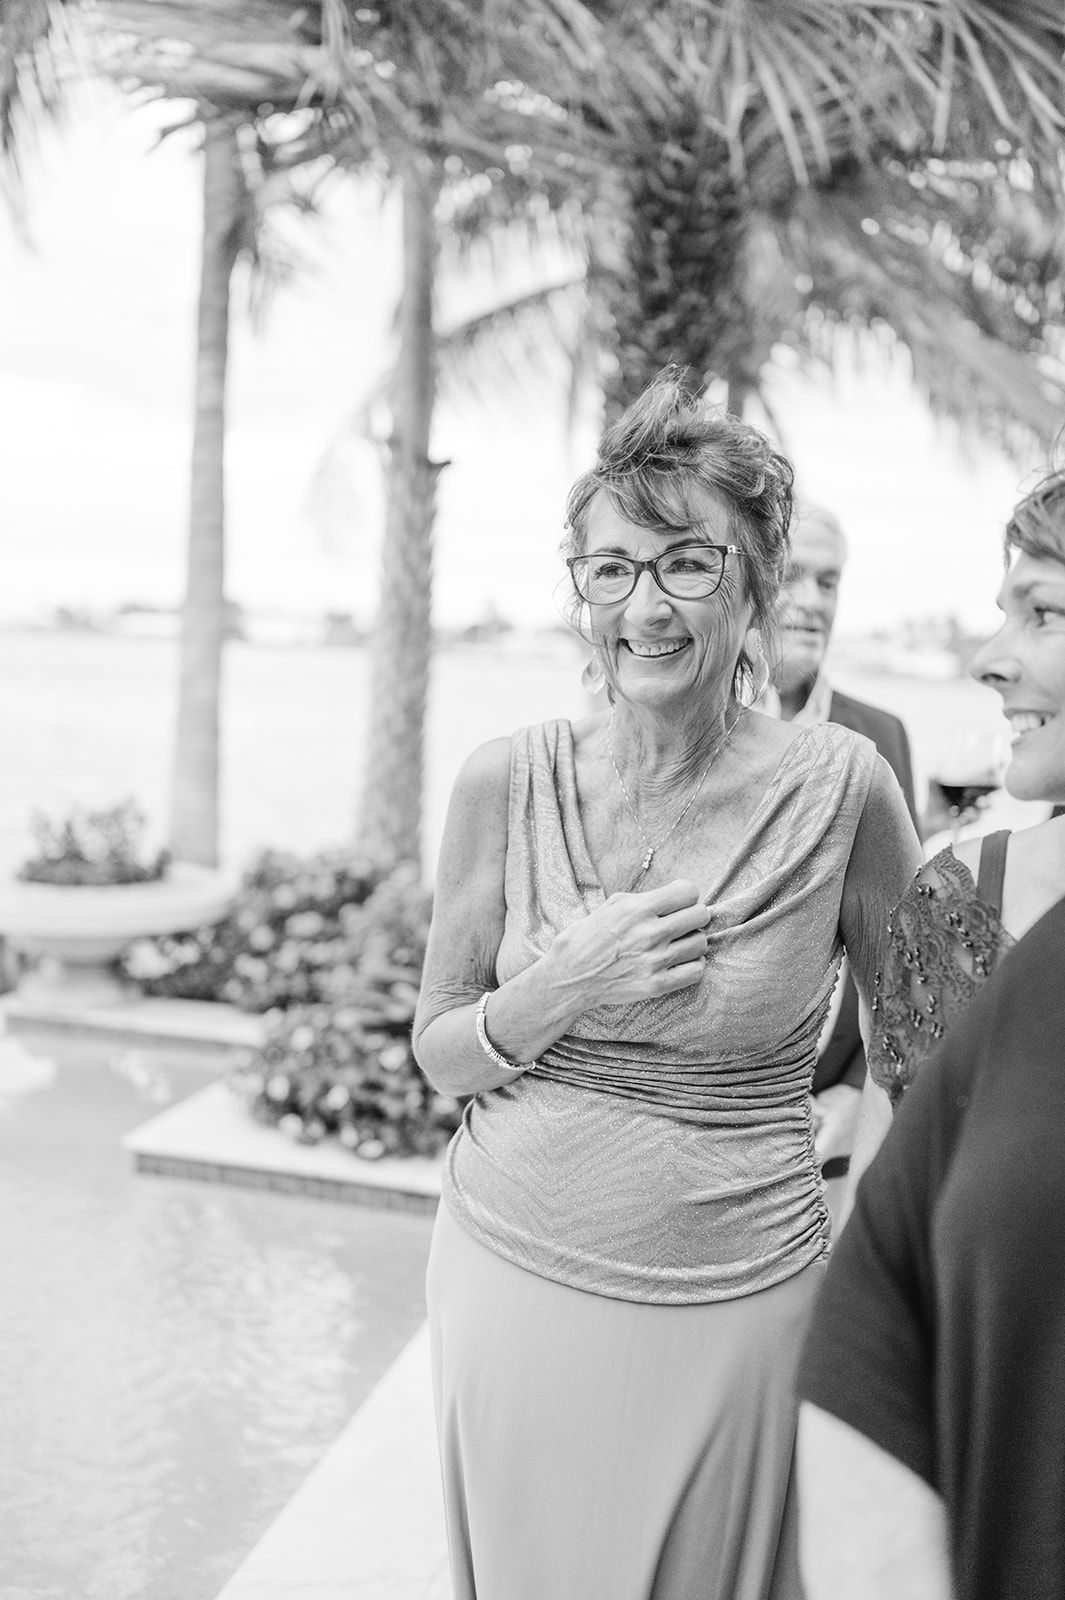 Naples Florida wedding photographer captures the newlyweds walking down the aisle together
